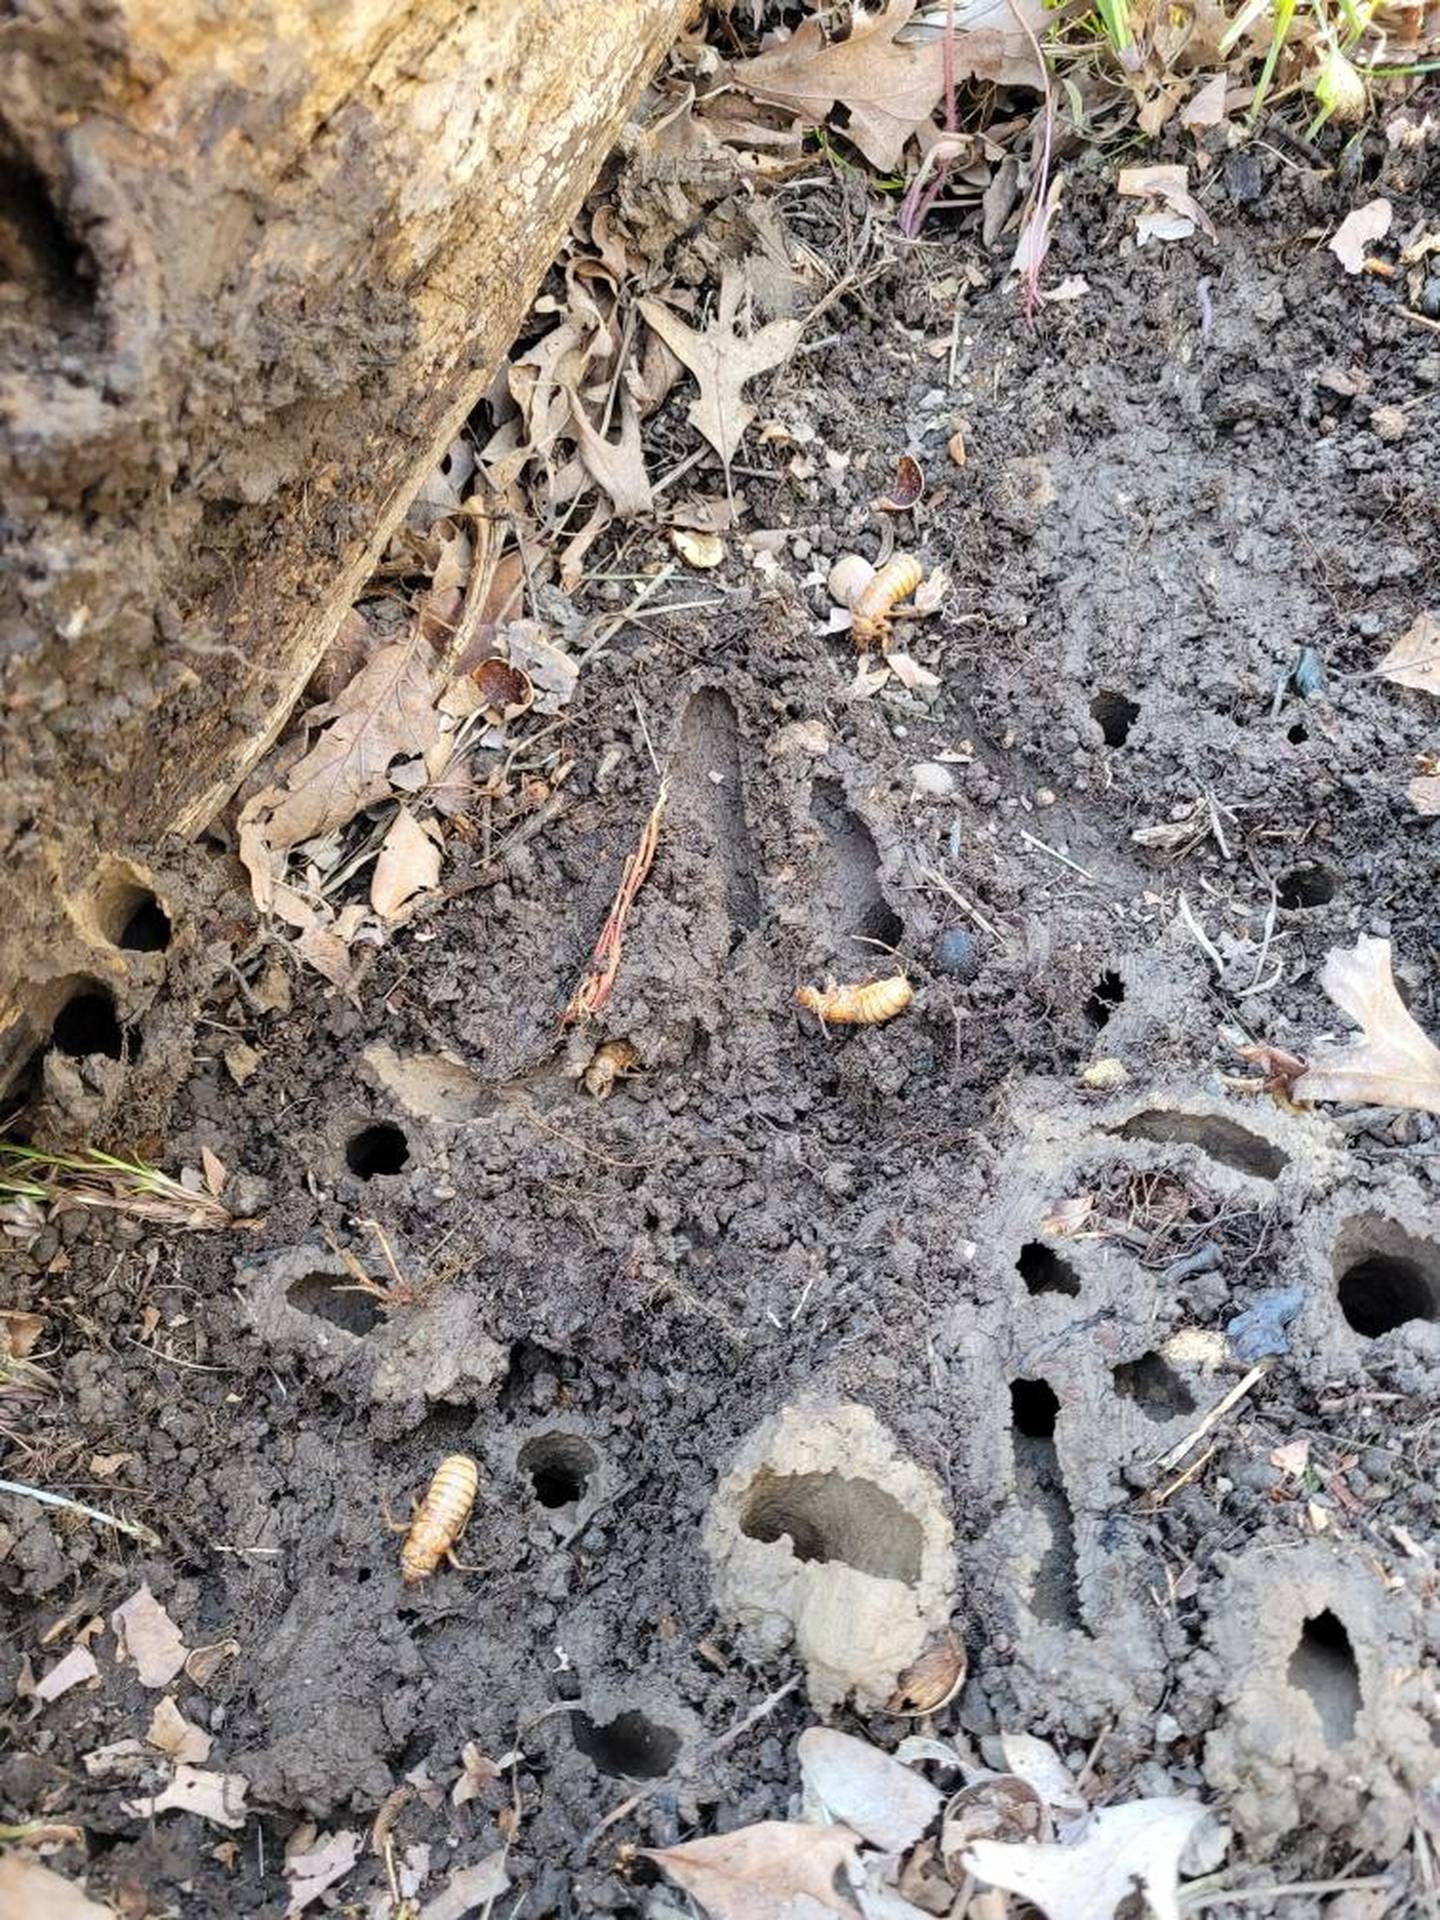 A McHenry County Conservation District staffer blowing leaves last week found this evidence of 17-year cicadas emerging from the ground the week of April 22, 2024.